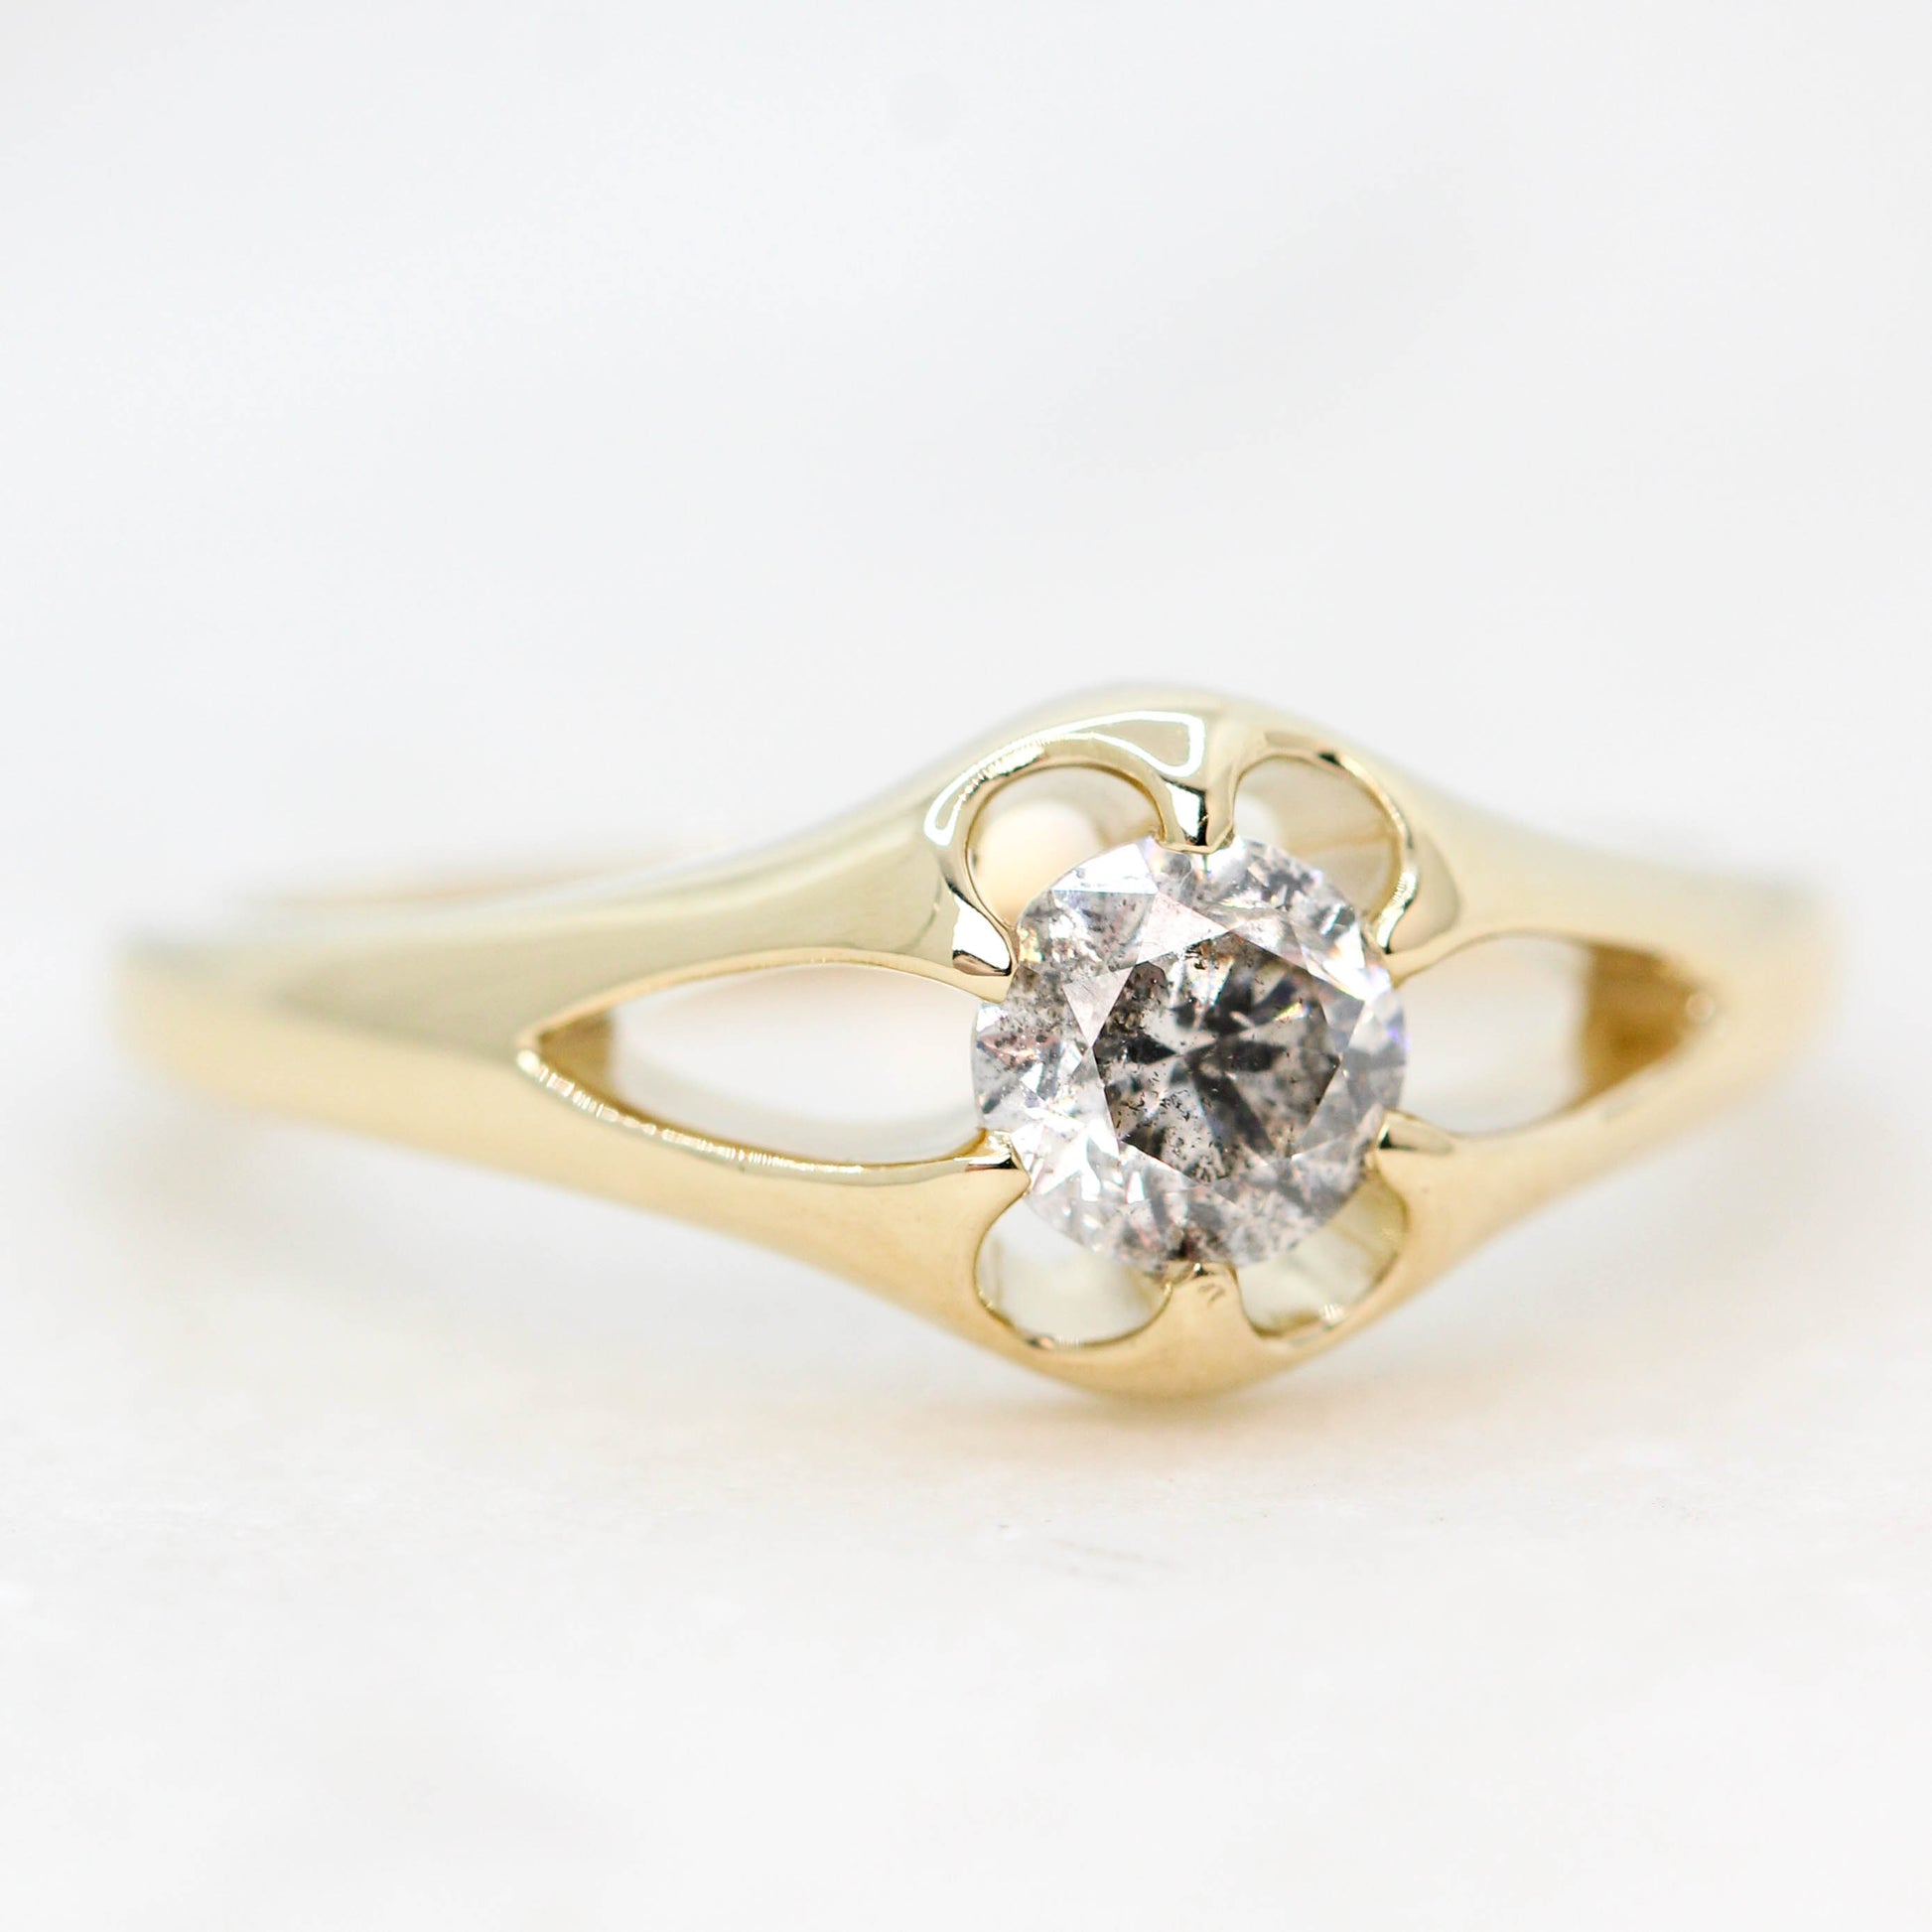 Lotus Ring with a 0.50 Carat Round Salt and Pepper Diamond - Made to Order, Choose Your Gold Tone - Midwinter Co. Alternative Bridal Rings and Modern Fine Jewelry